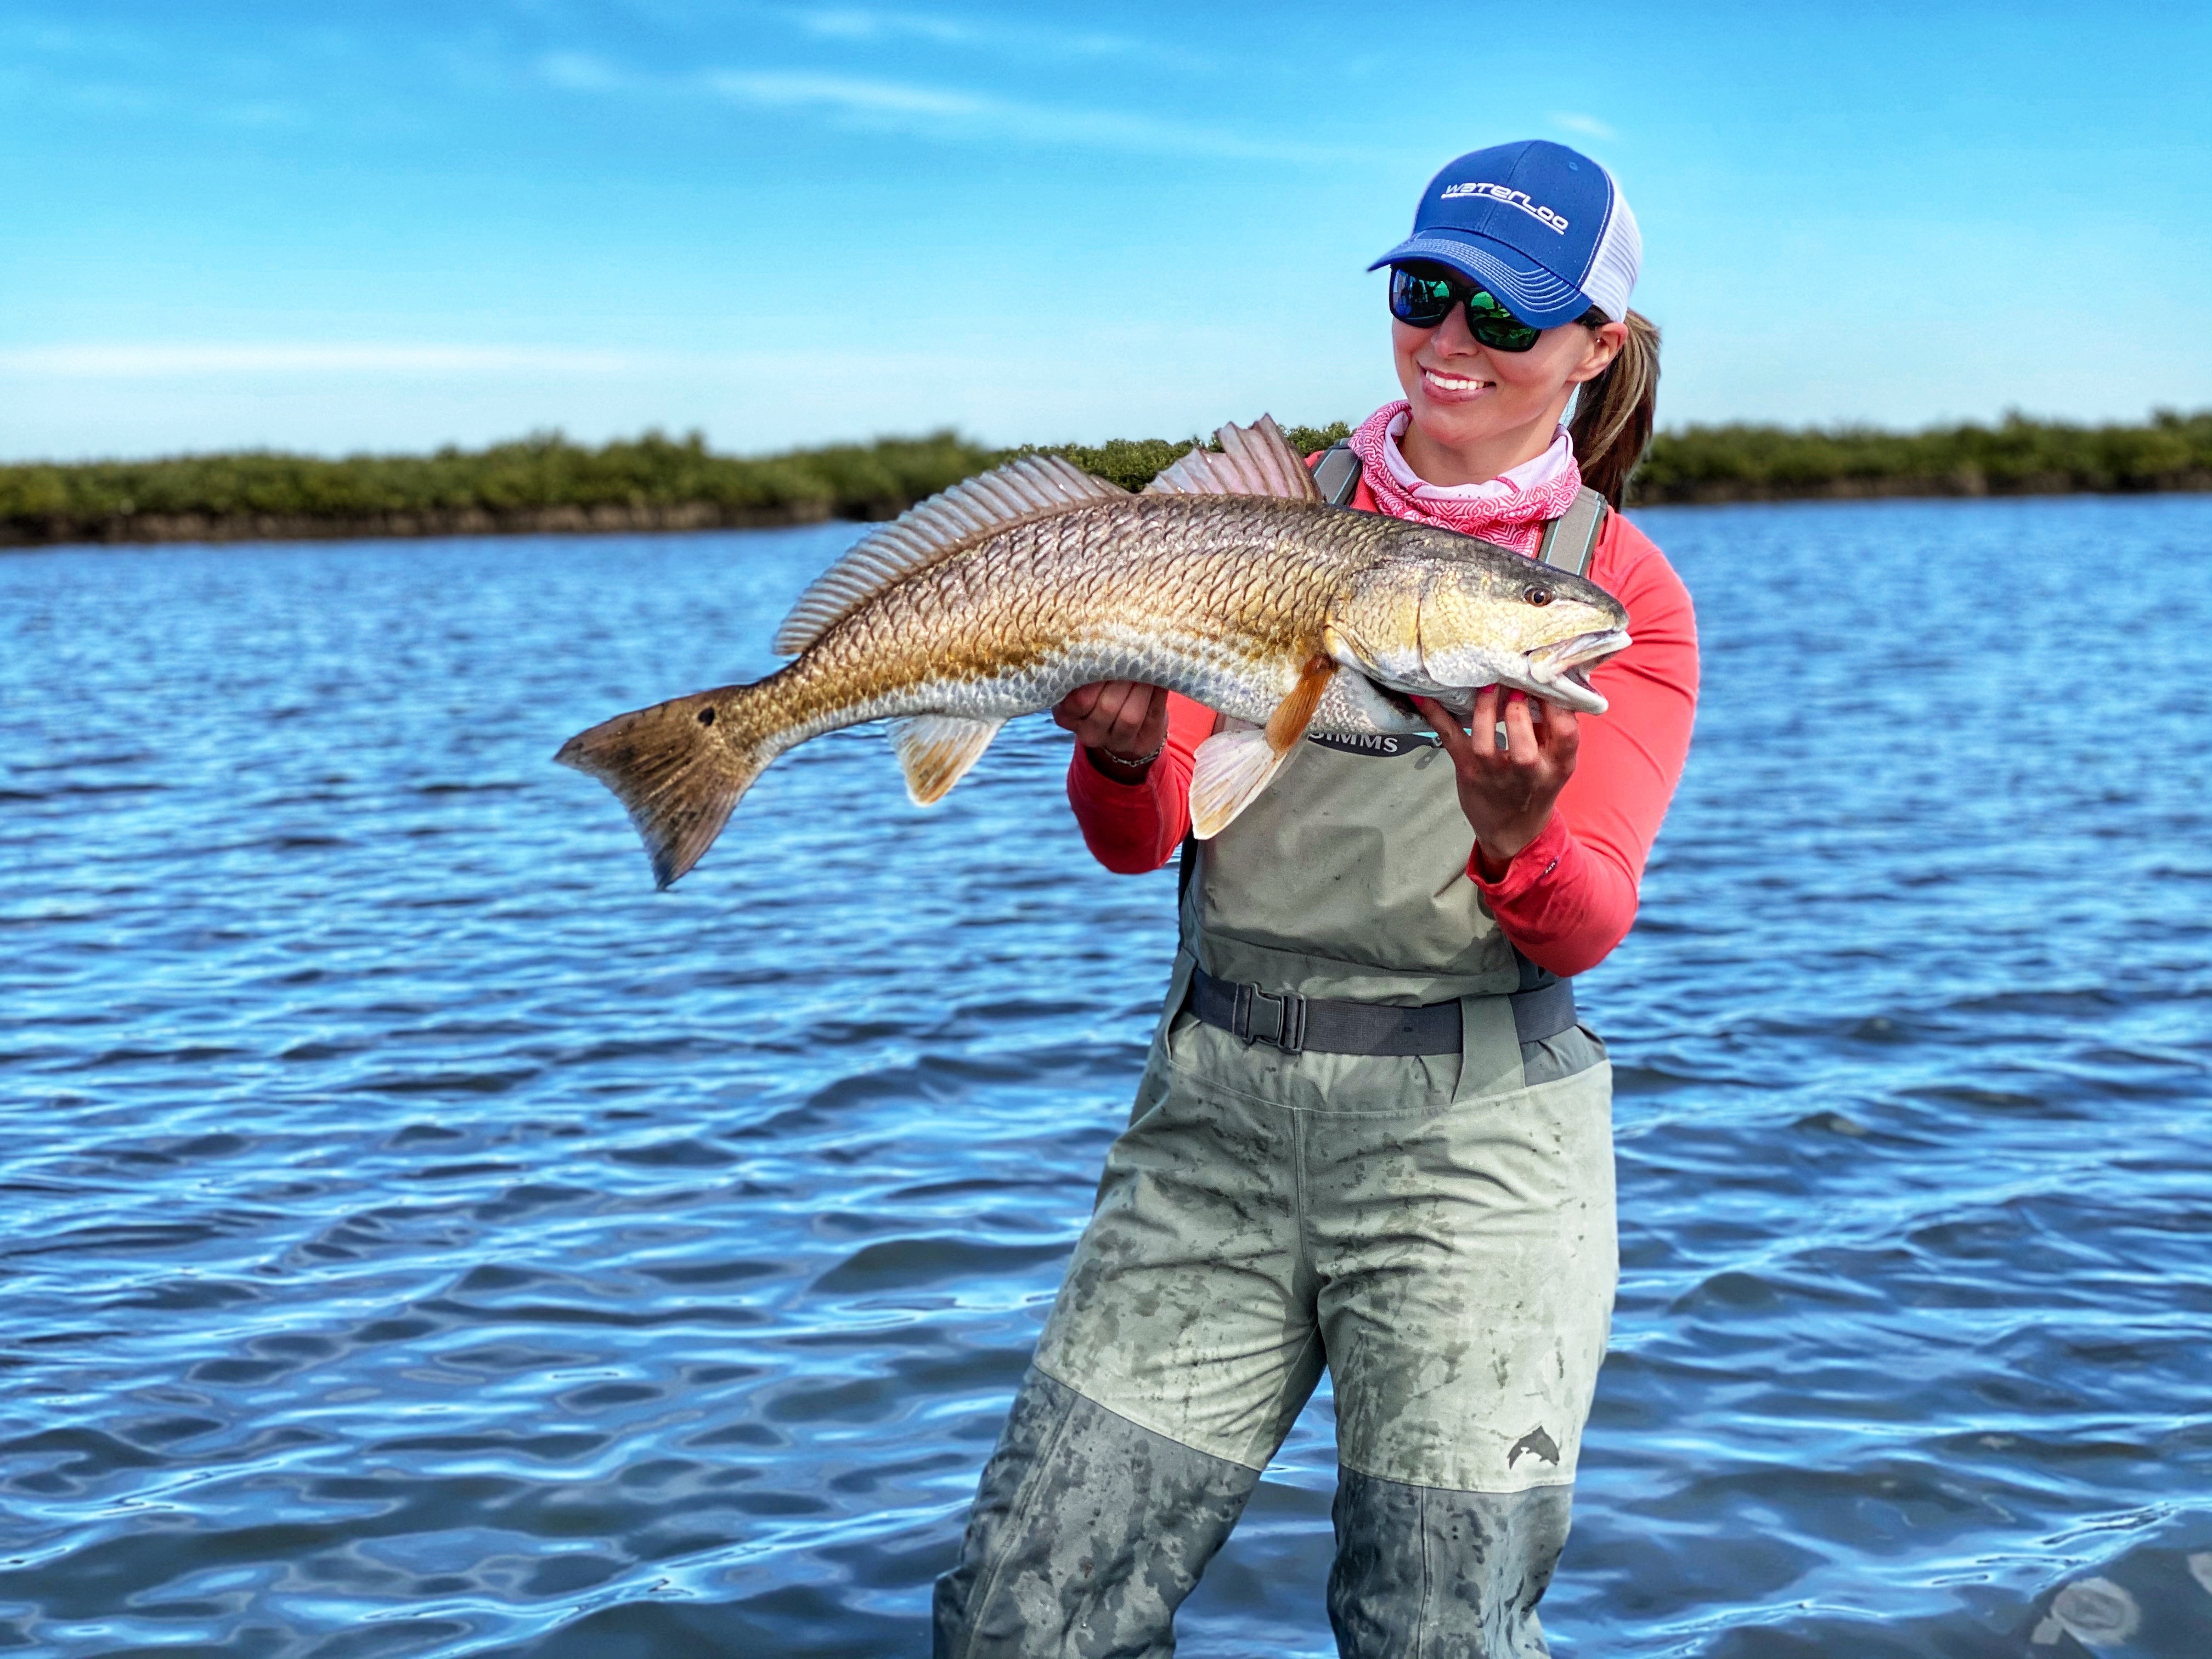 A good hookset is needed to catch redfish